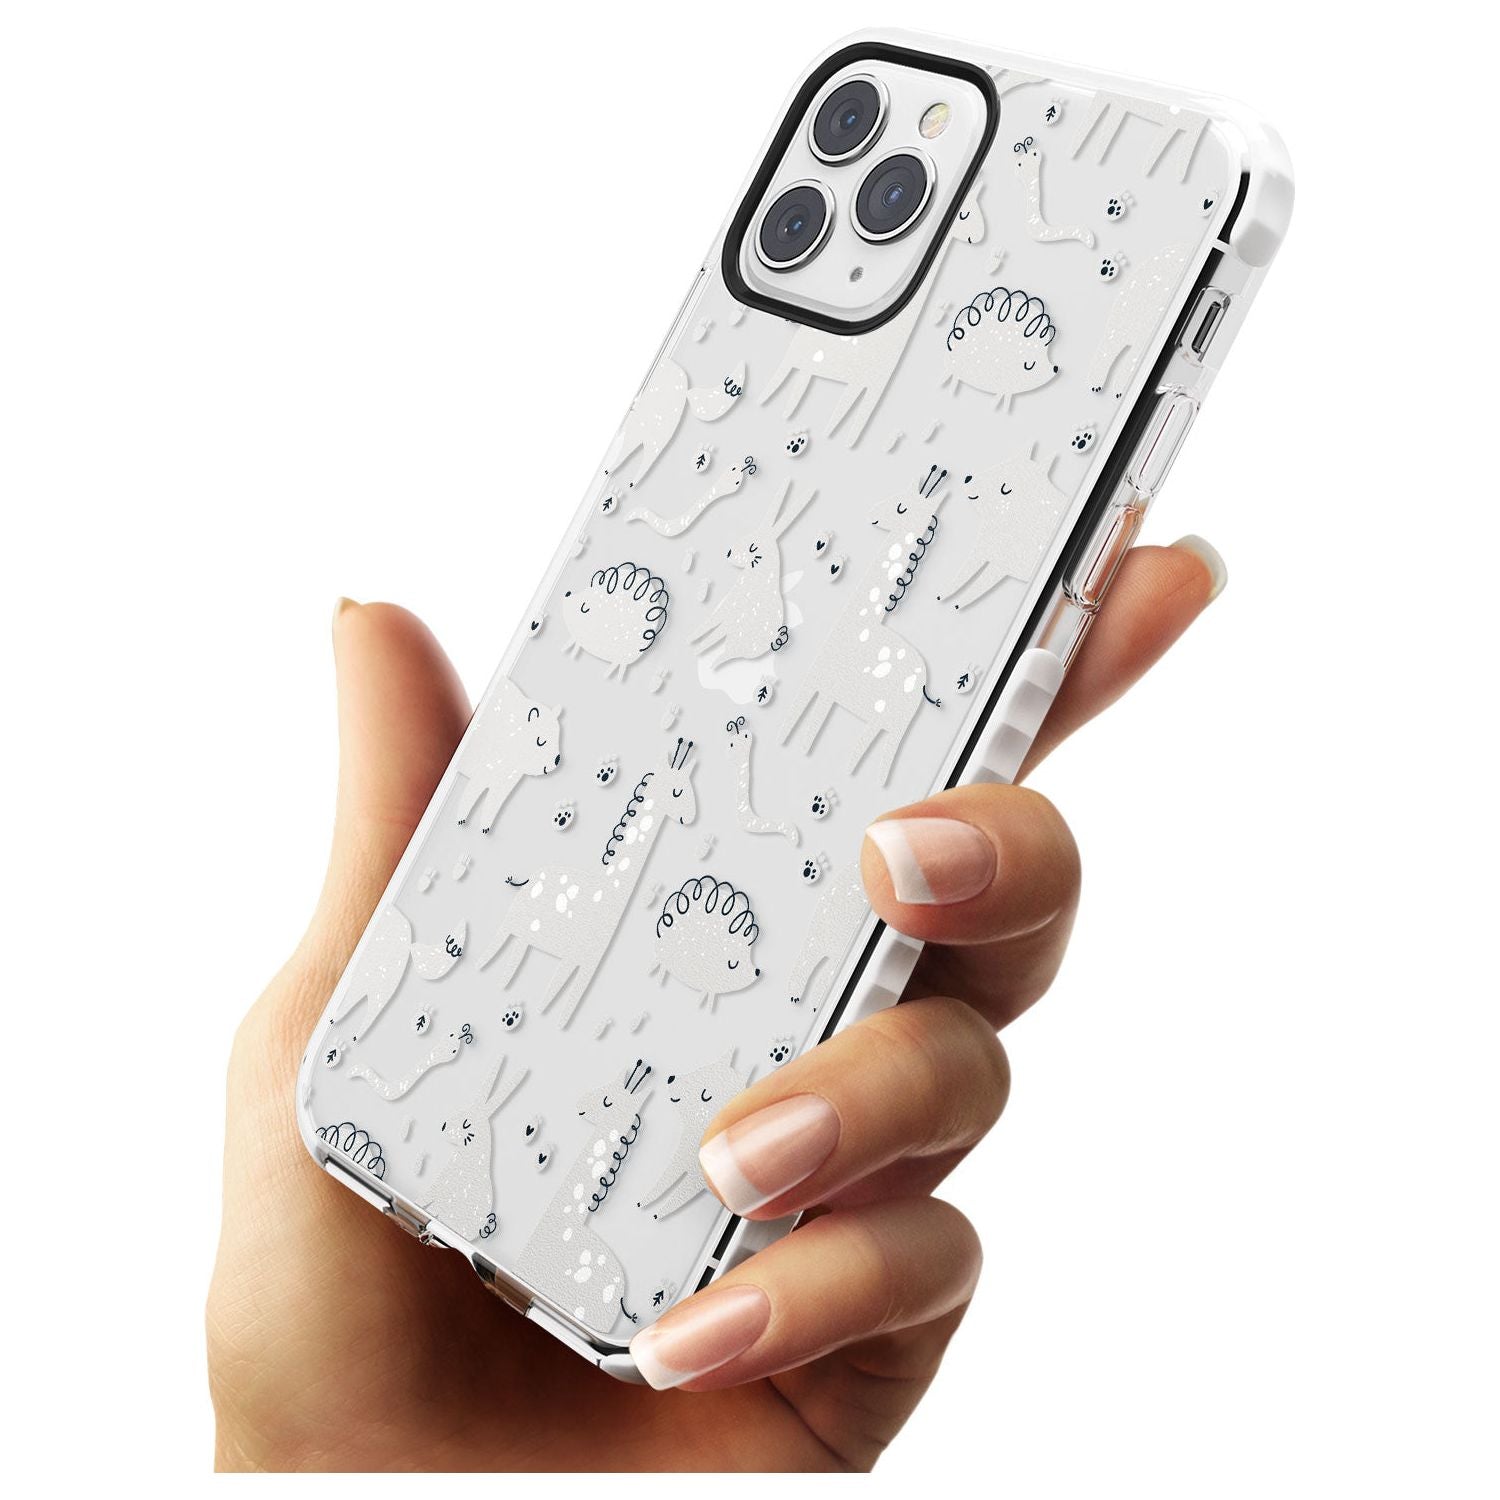 Adorable Mixed Animals Pattern (Clear) Impact Phone Case for iPhone 11 Pro Max